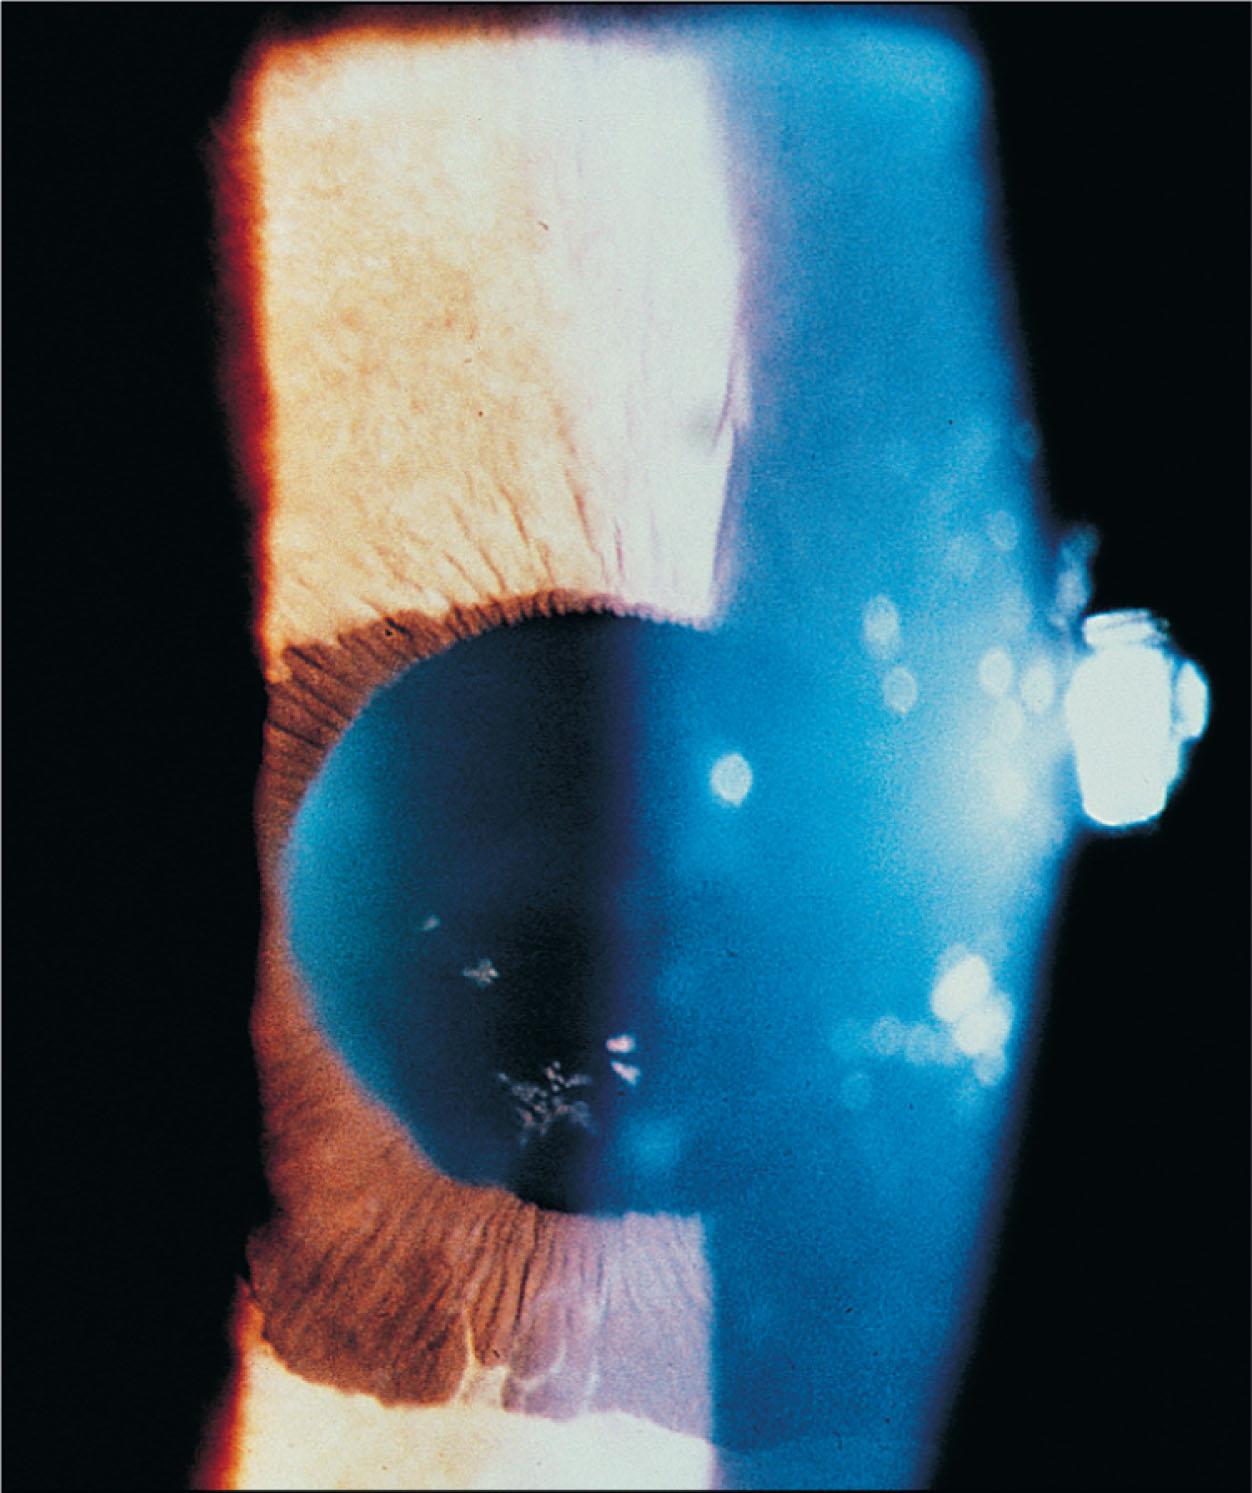 Fig. 10.19.3, Corneal Edema and Iris Findings Are Typical of Chandler’s Syndrome.